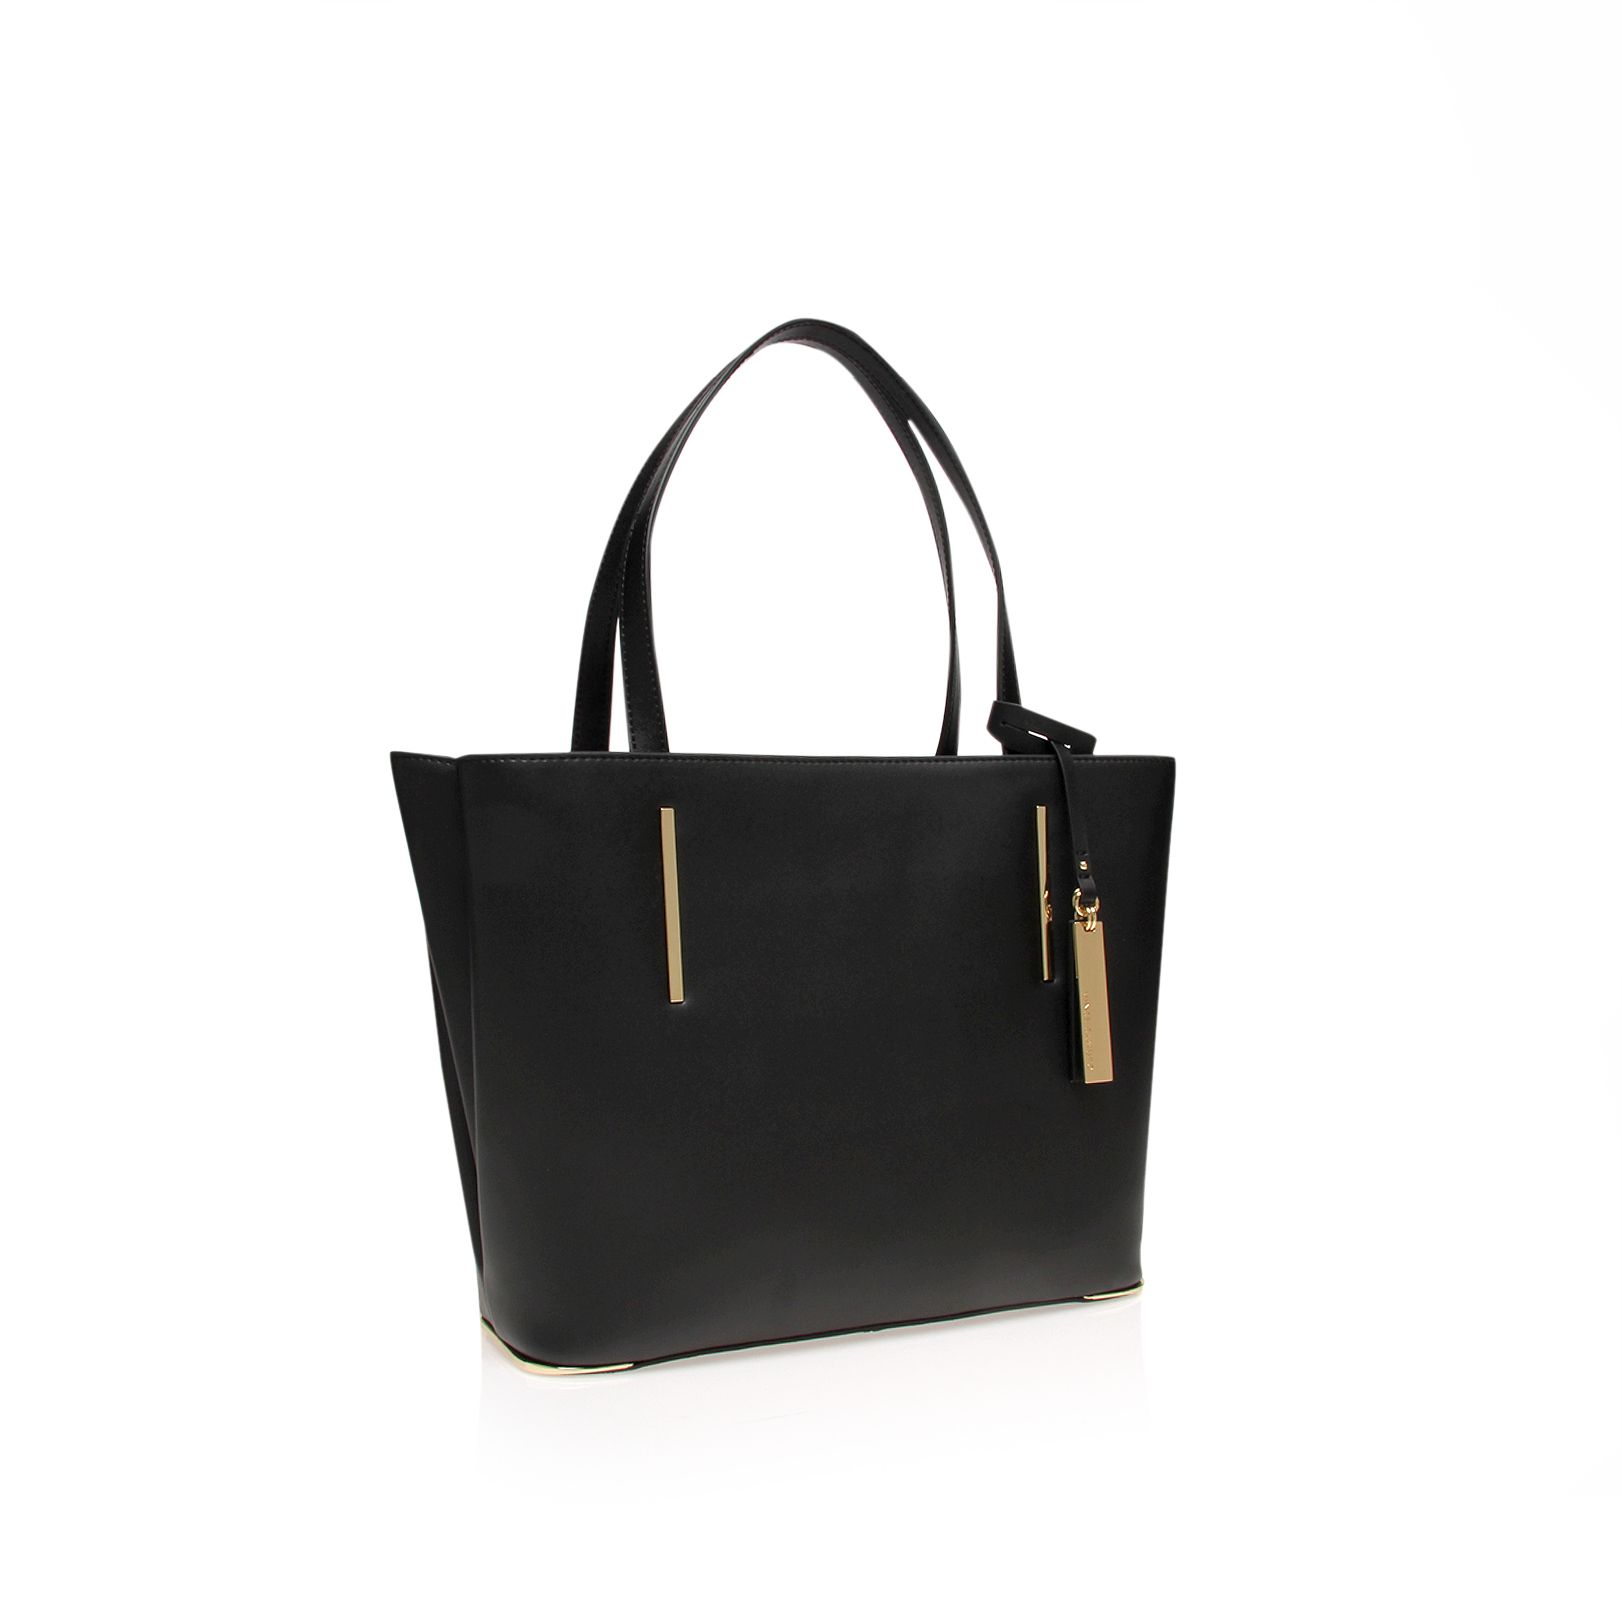 Vince Camuto | ZOLA SMALL TOTE Black Tote Bag by VINCE CAMUTO